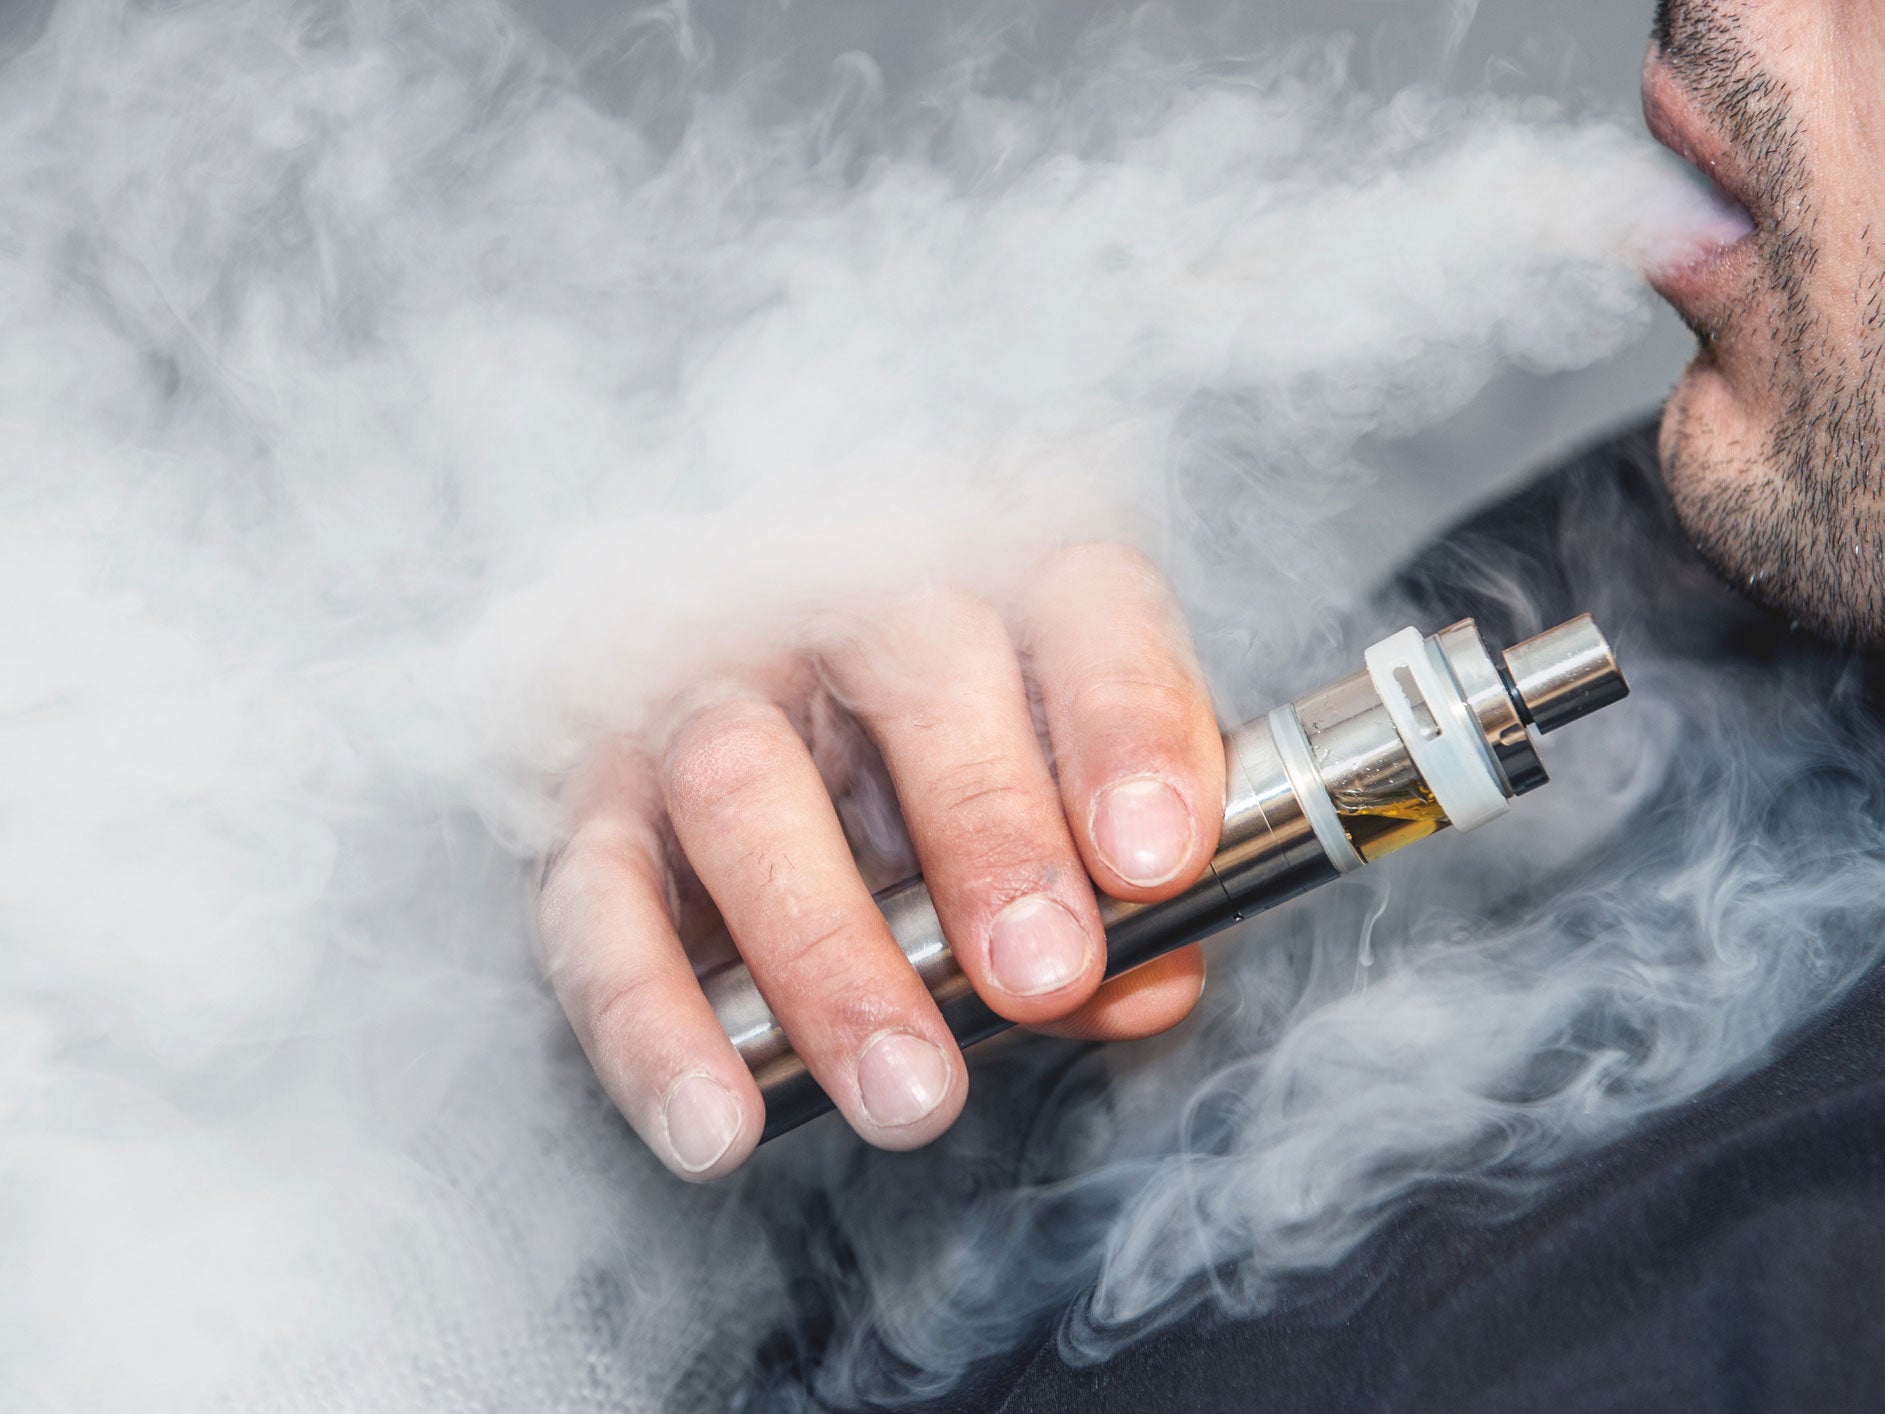 How Long Does Vape Smoke Stay in the Air?